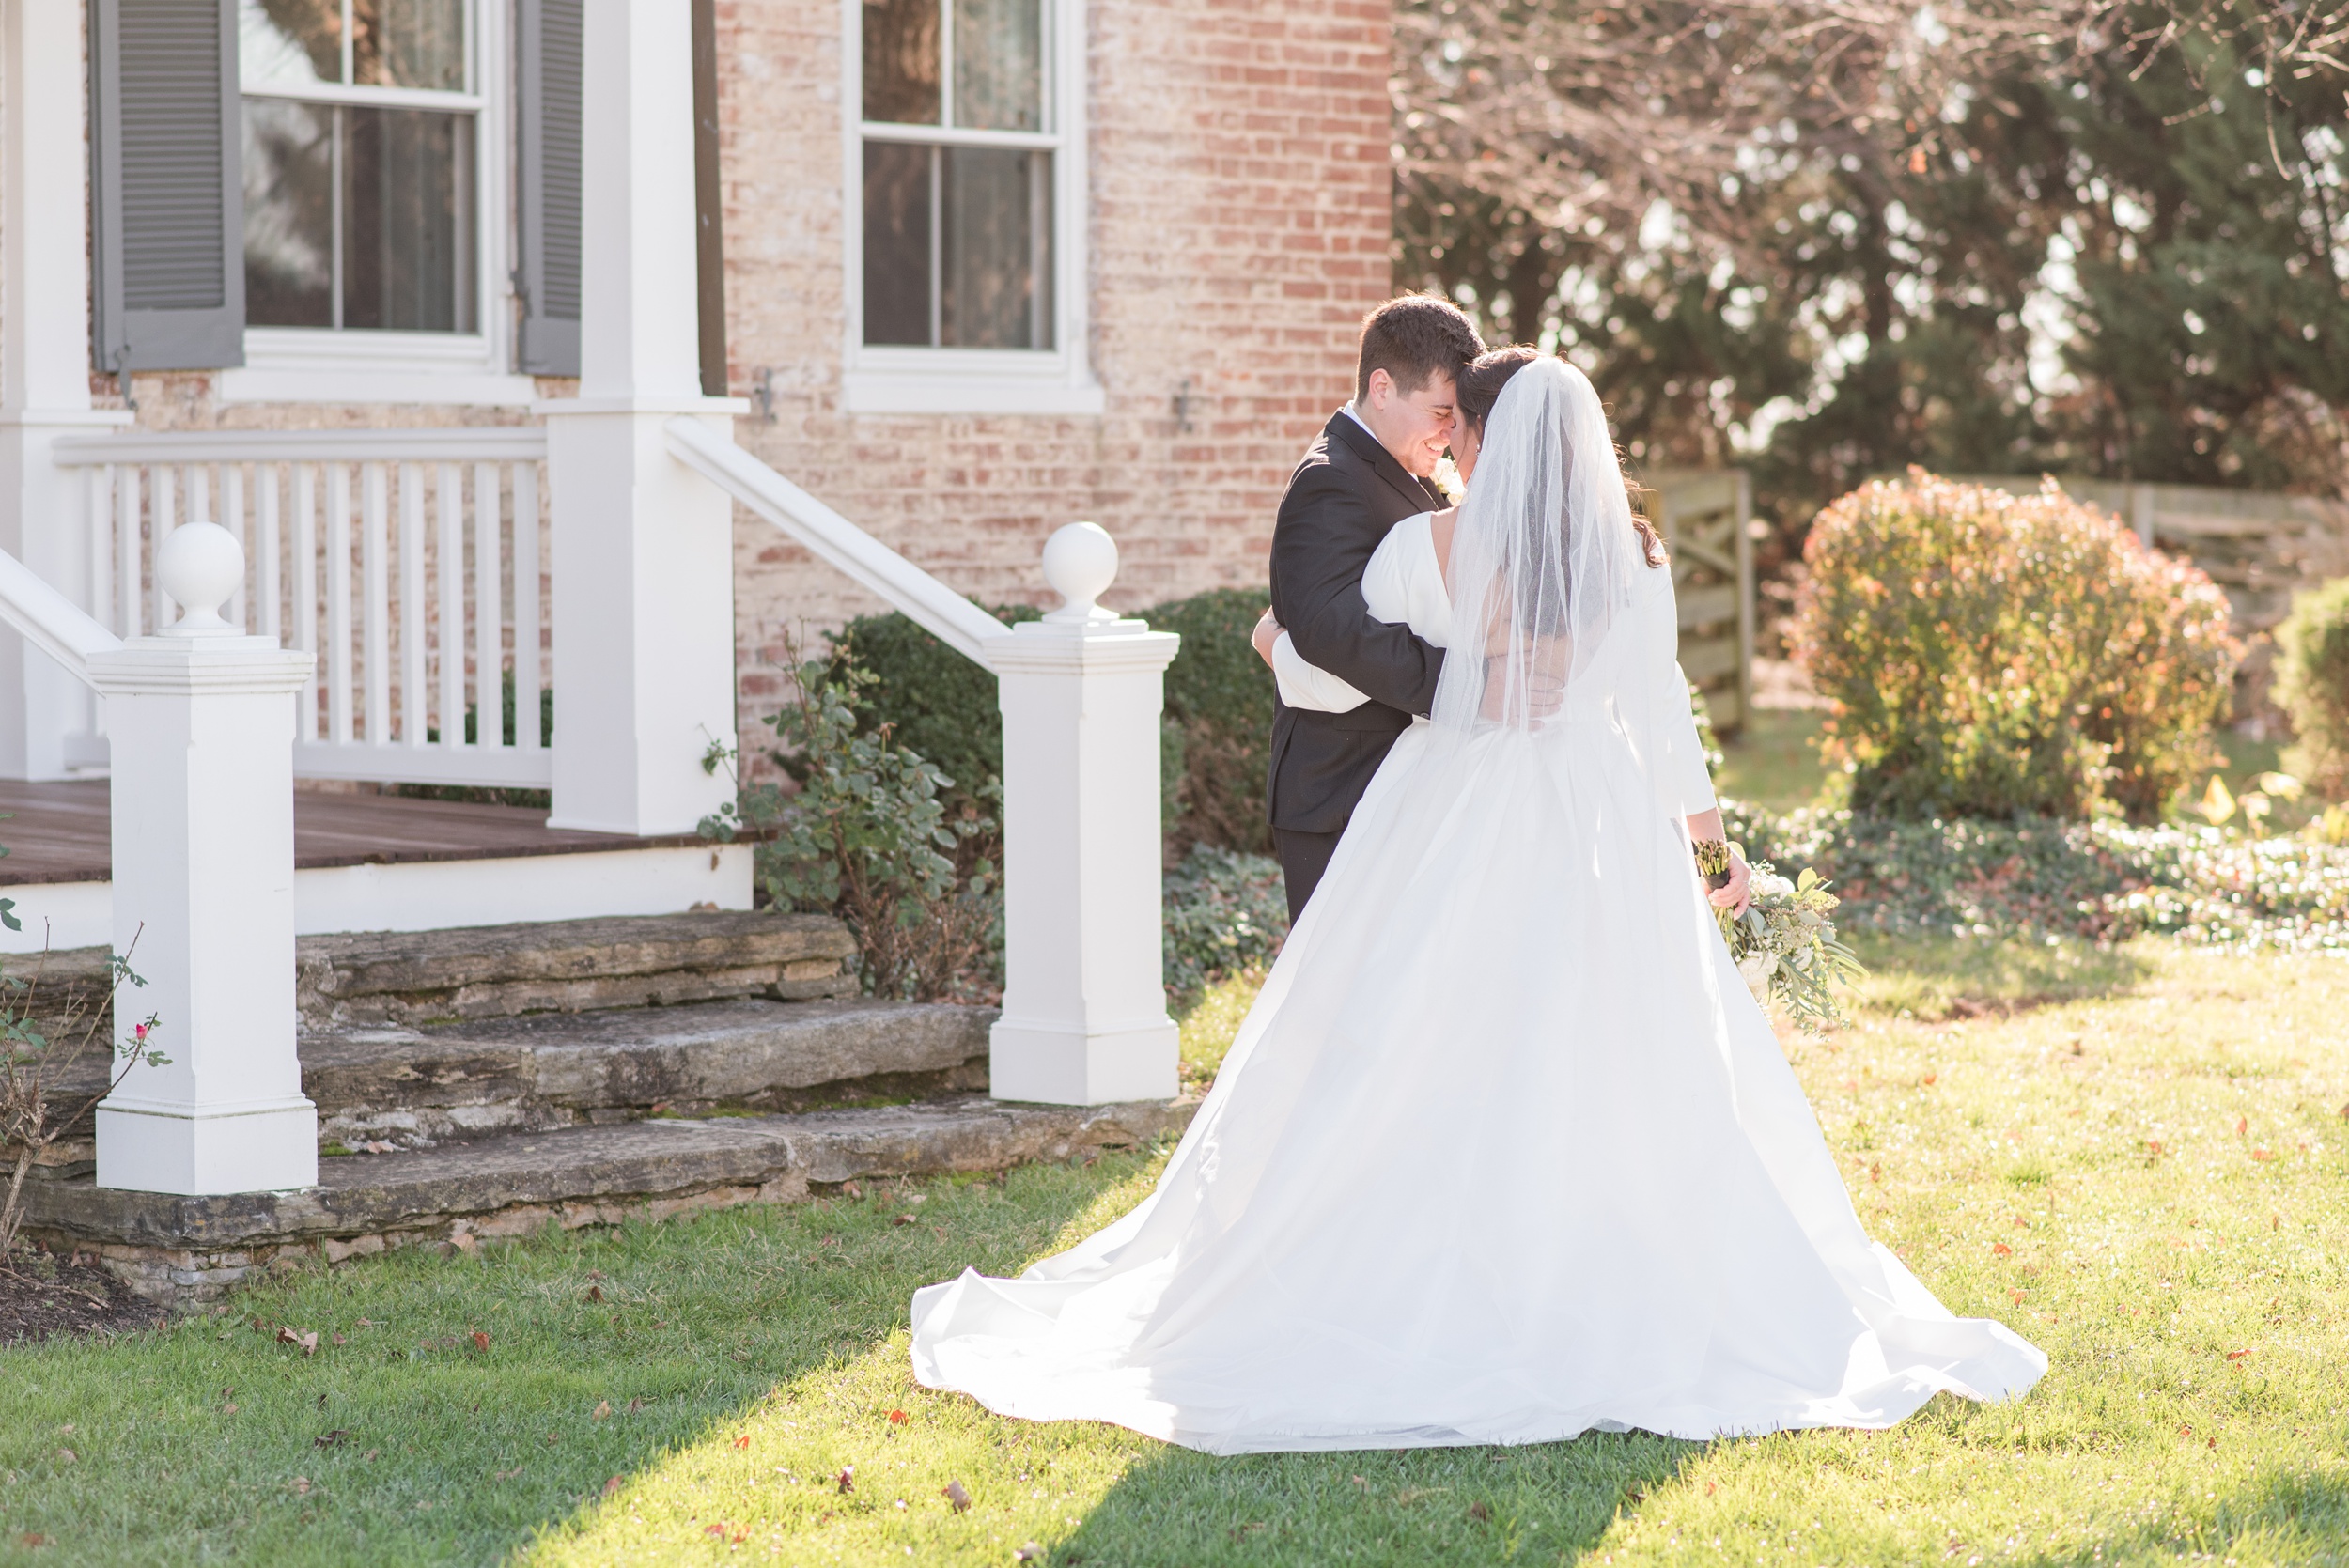 Newlyweds share an intimate happy moment in a garden at their Walkers Overlook Wedding